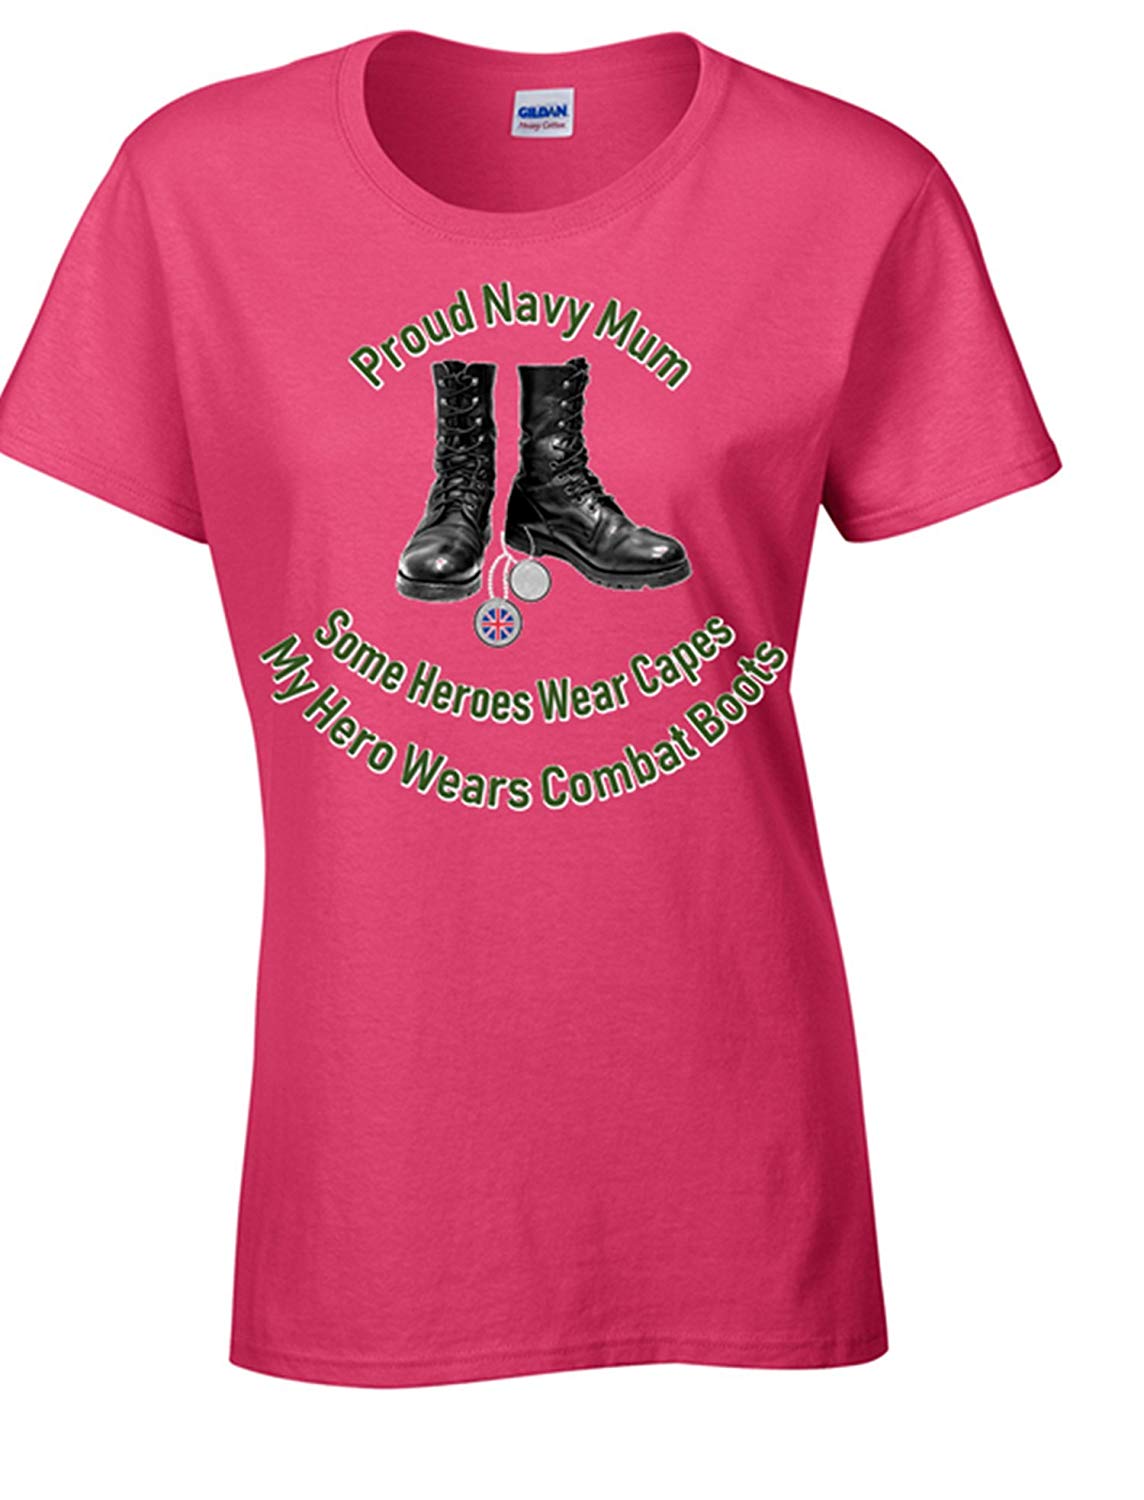 Bear Essentials Clothing Proud Navy Mum T-Shirt - Army 1157 kit Pink / L Army 1157 Kit Veterans Owned Business